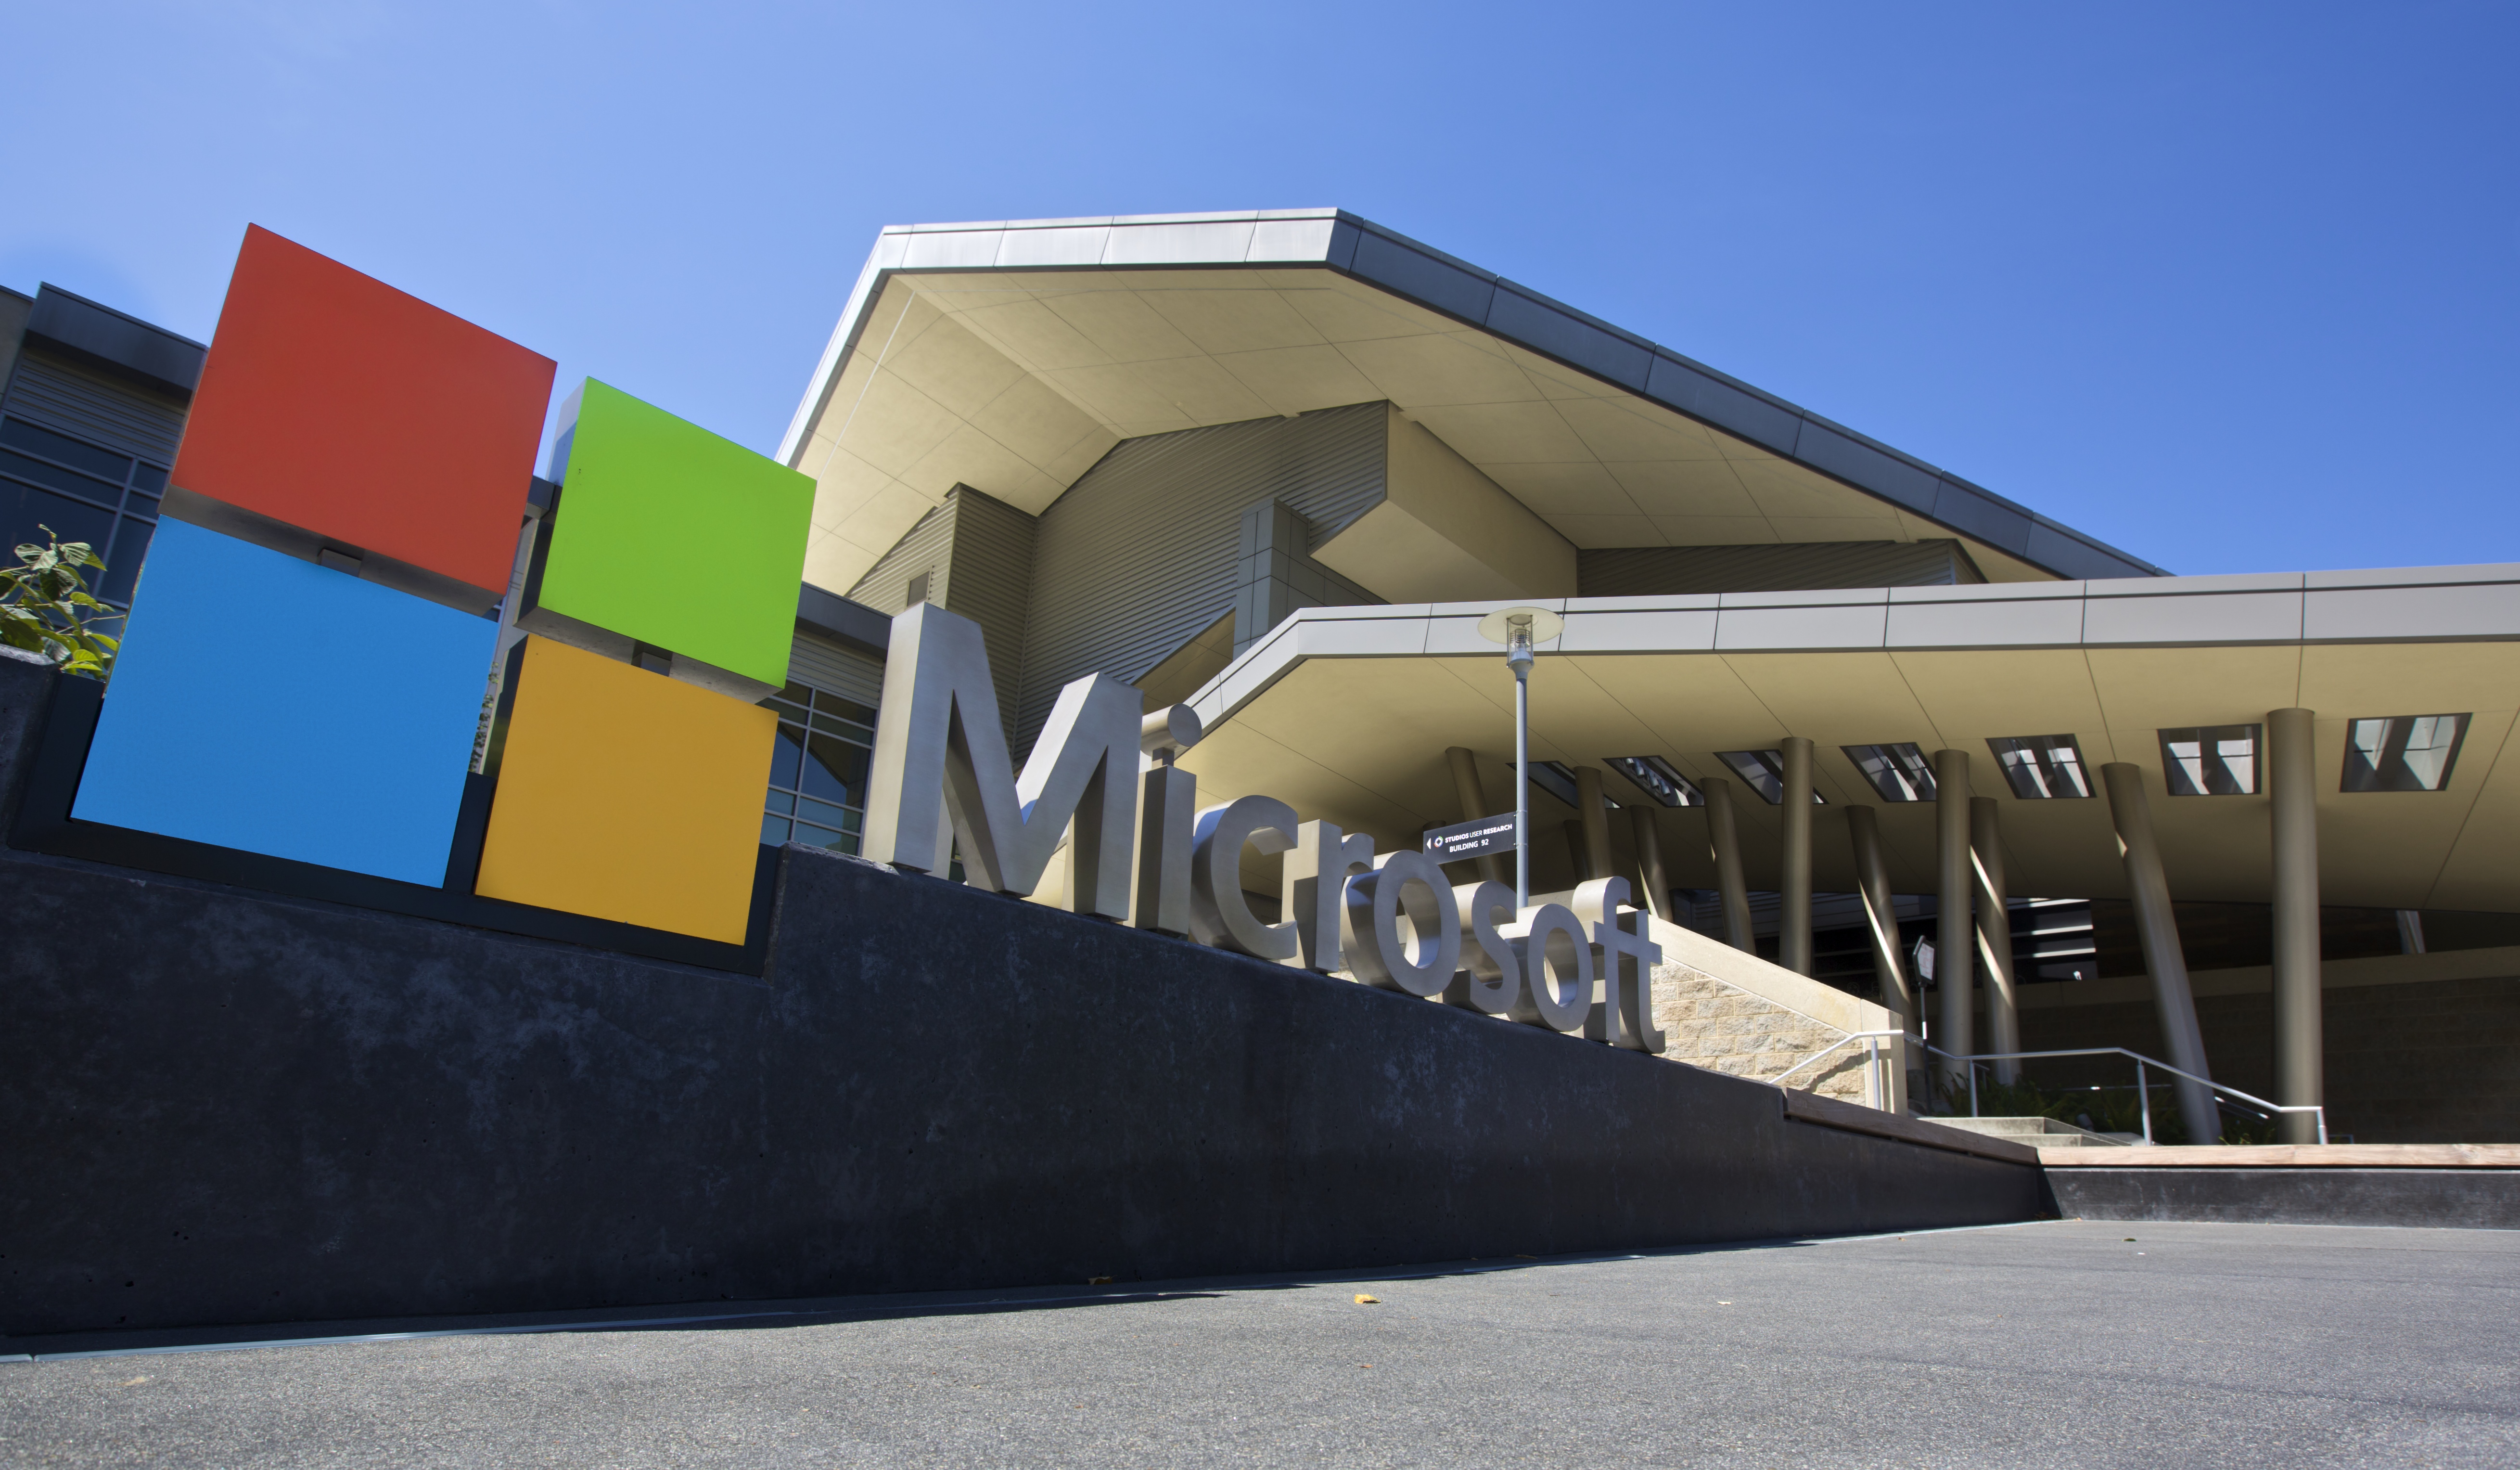 The Visitor’s Center at Microsoft Headquarters campus is pictured July 17, 2014 in Redmond, Washington. (Stephen Brashear/Getty Images)